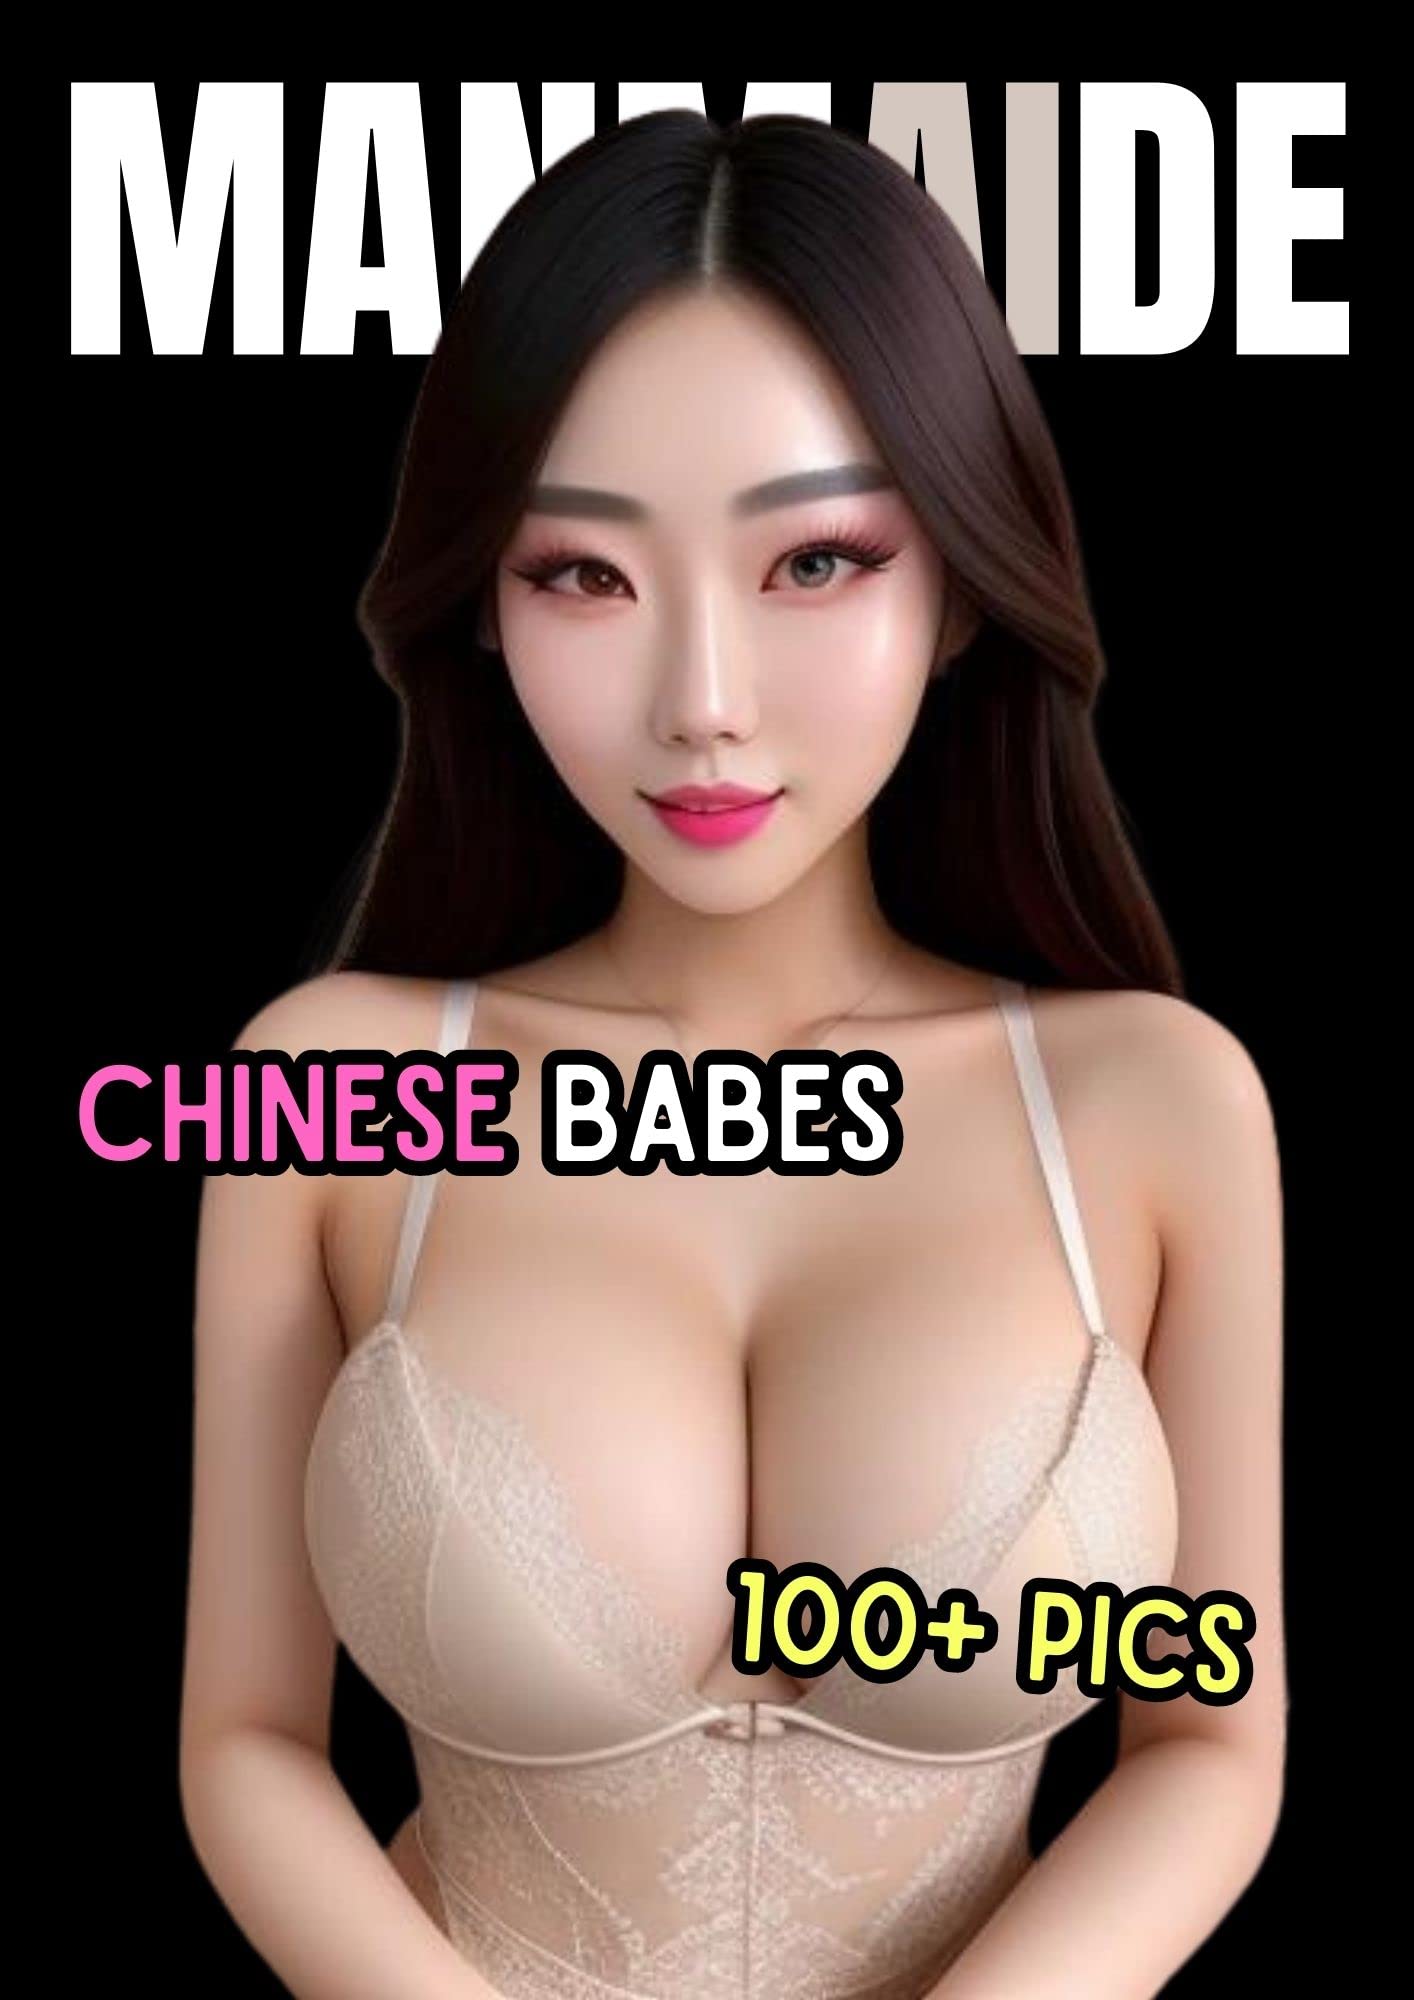 david j houston recommends Asian Babe Big Boobs